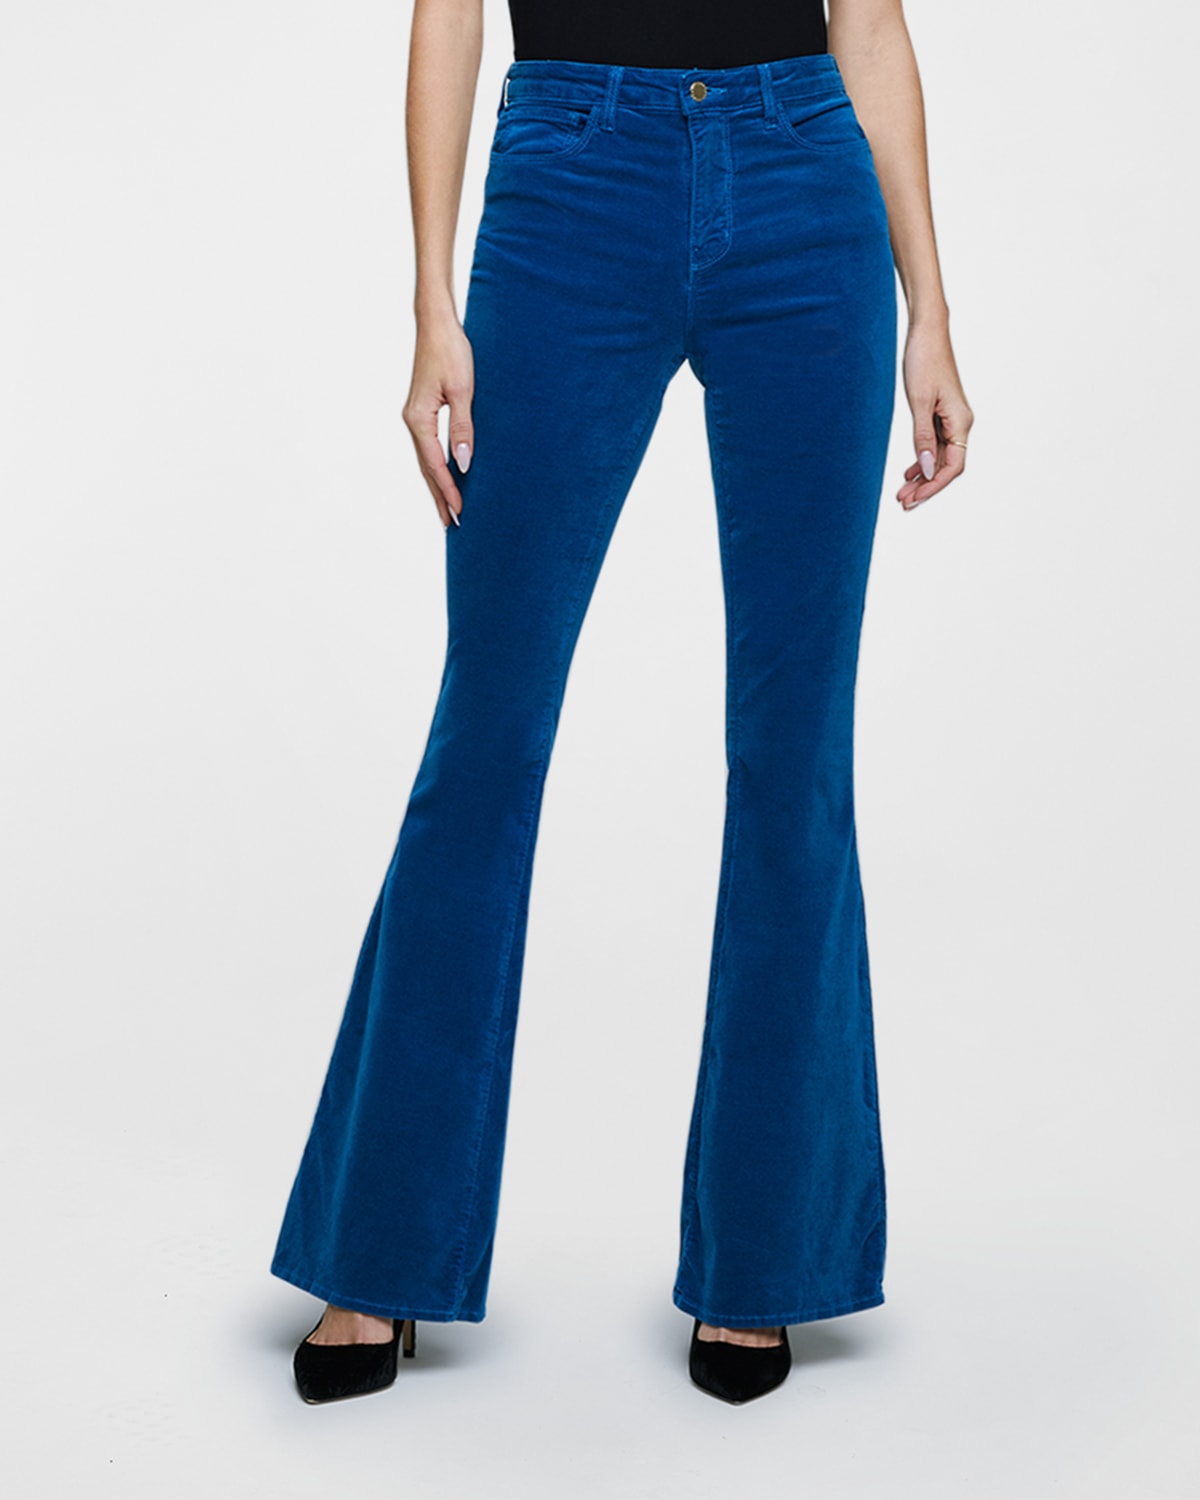 L'Agence Marty High-Rise Flared Jeans